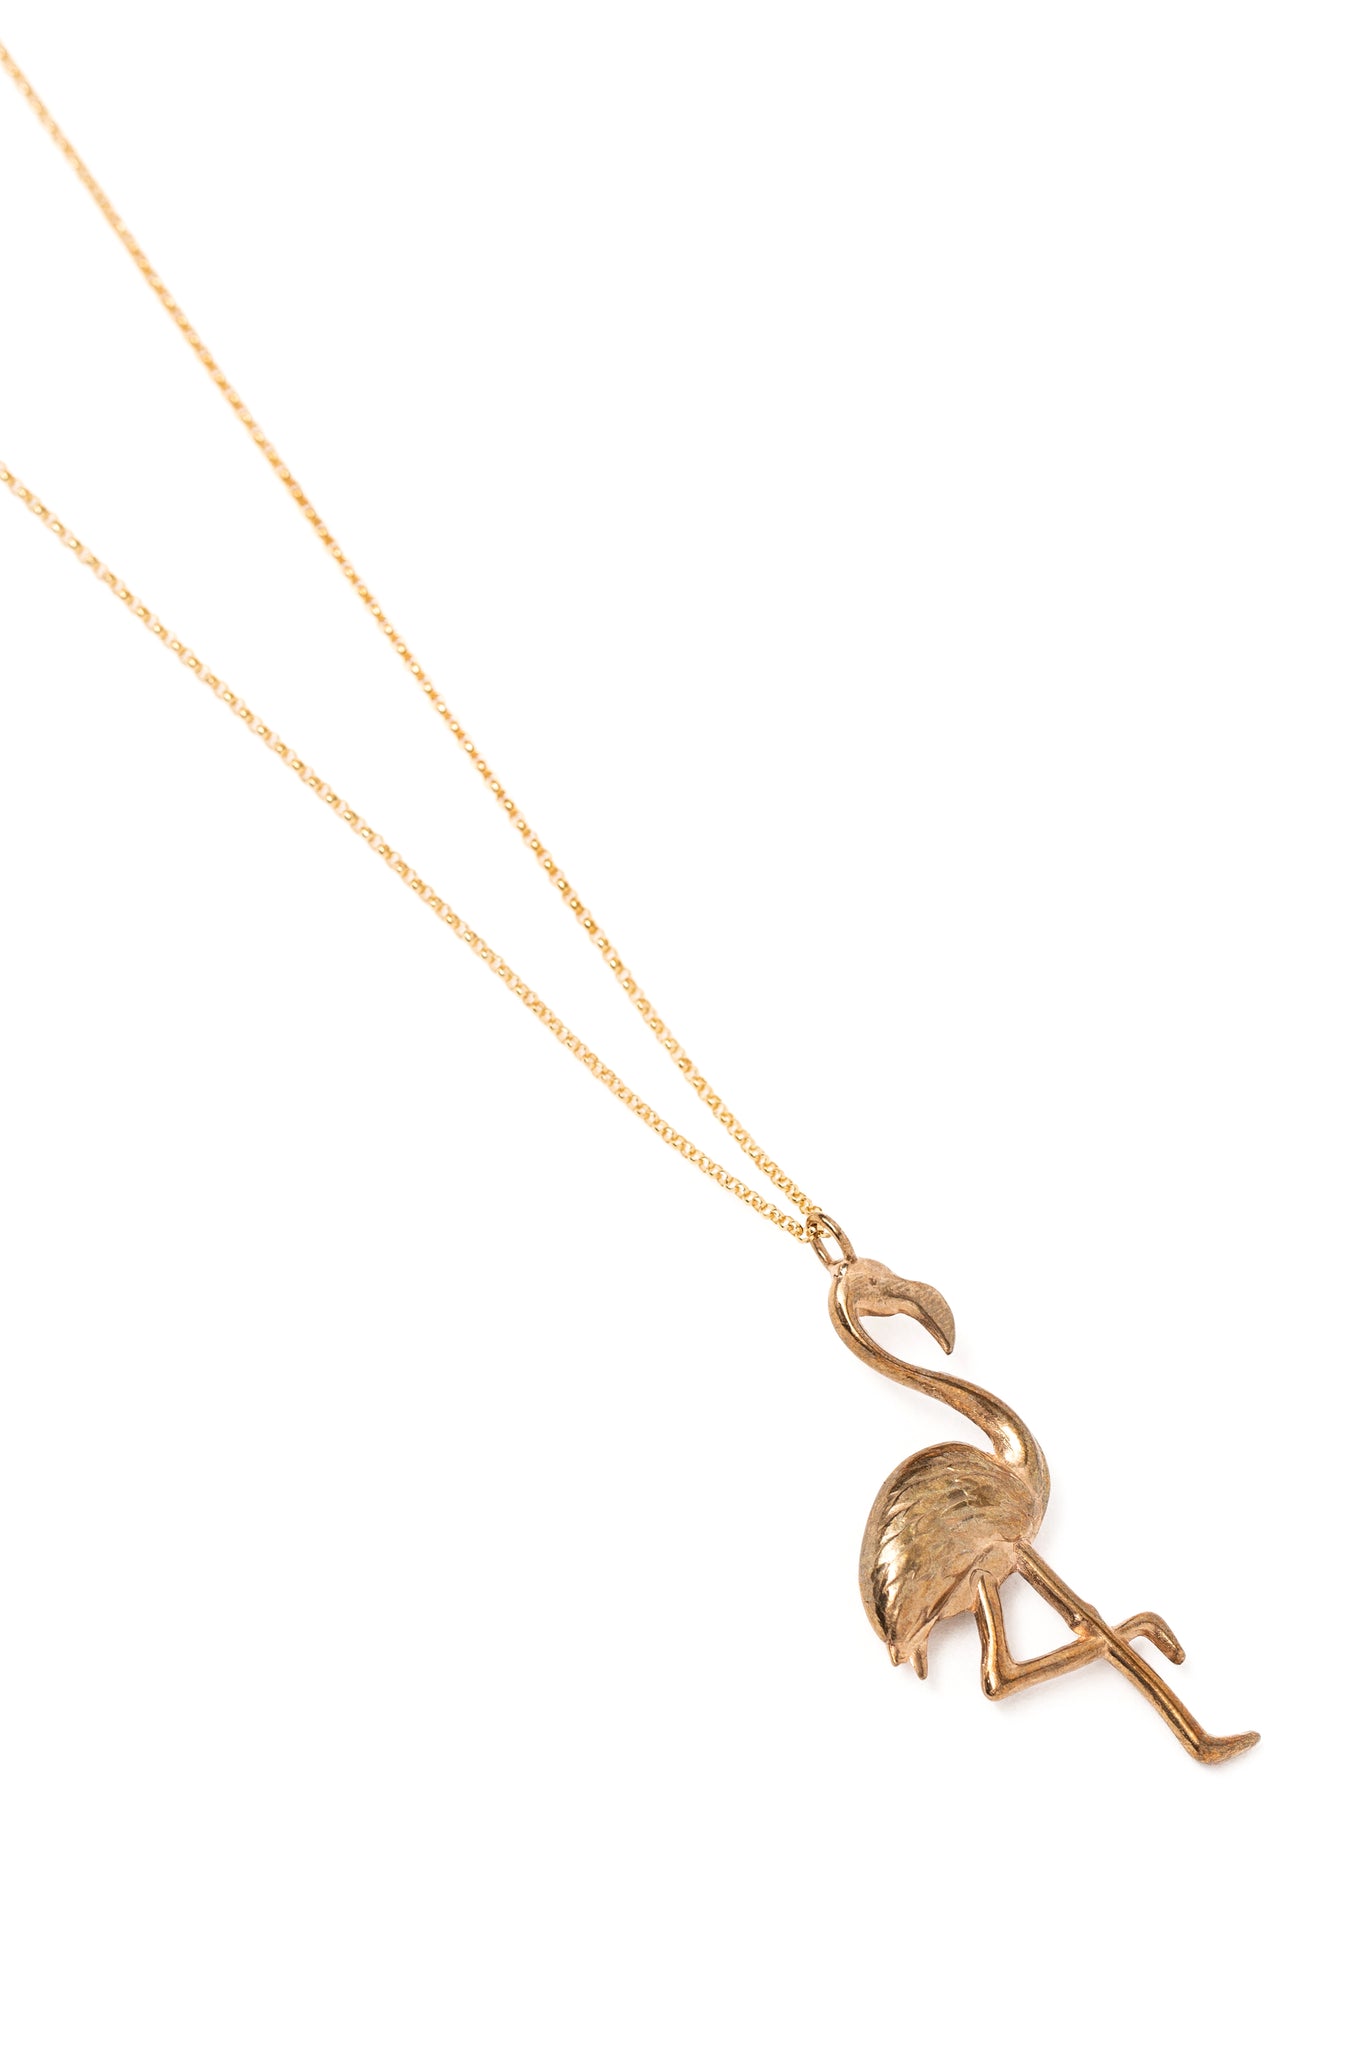 Pink Mother of Peral & Sterling Silver Flamingo Necklace – Silver and Gold  - Key West